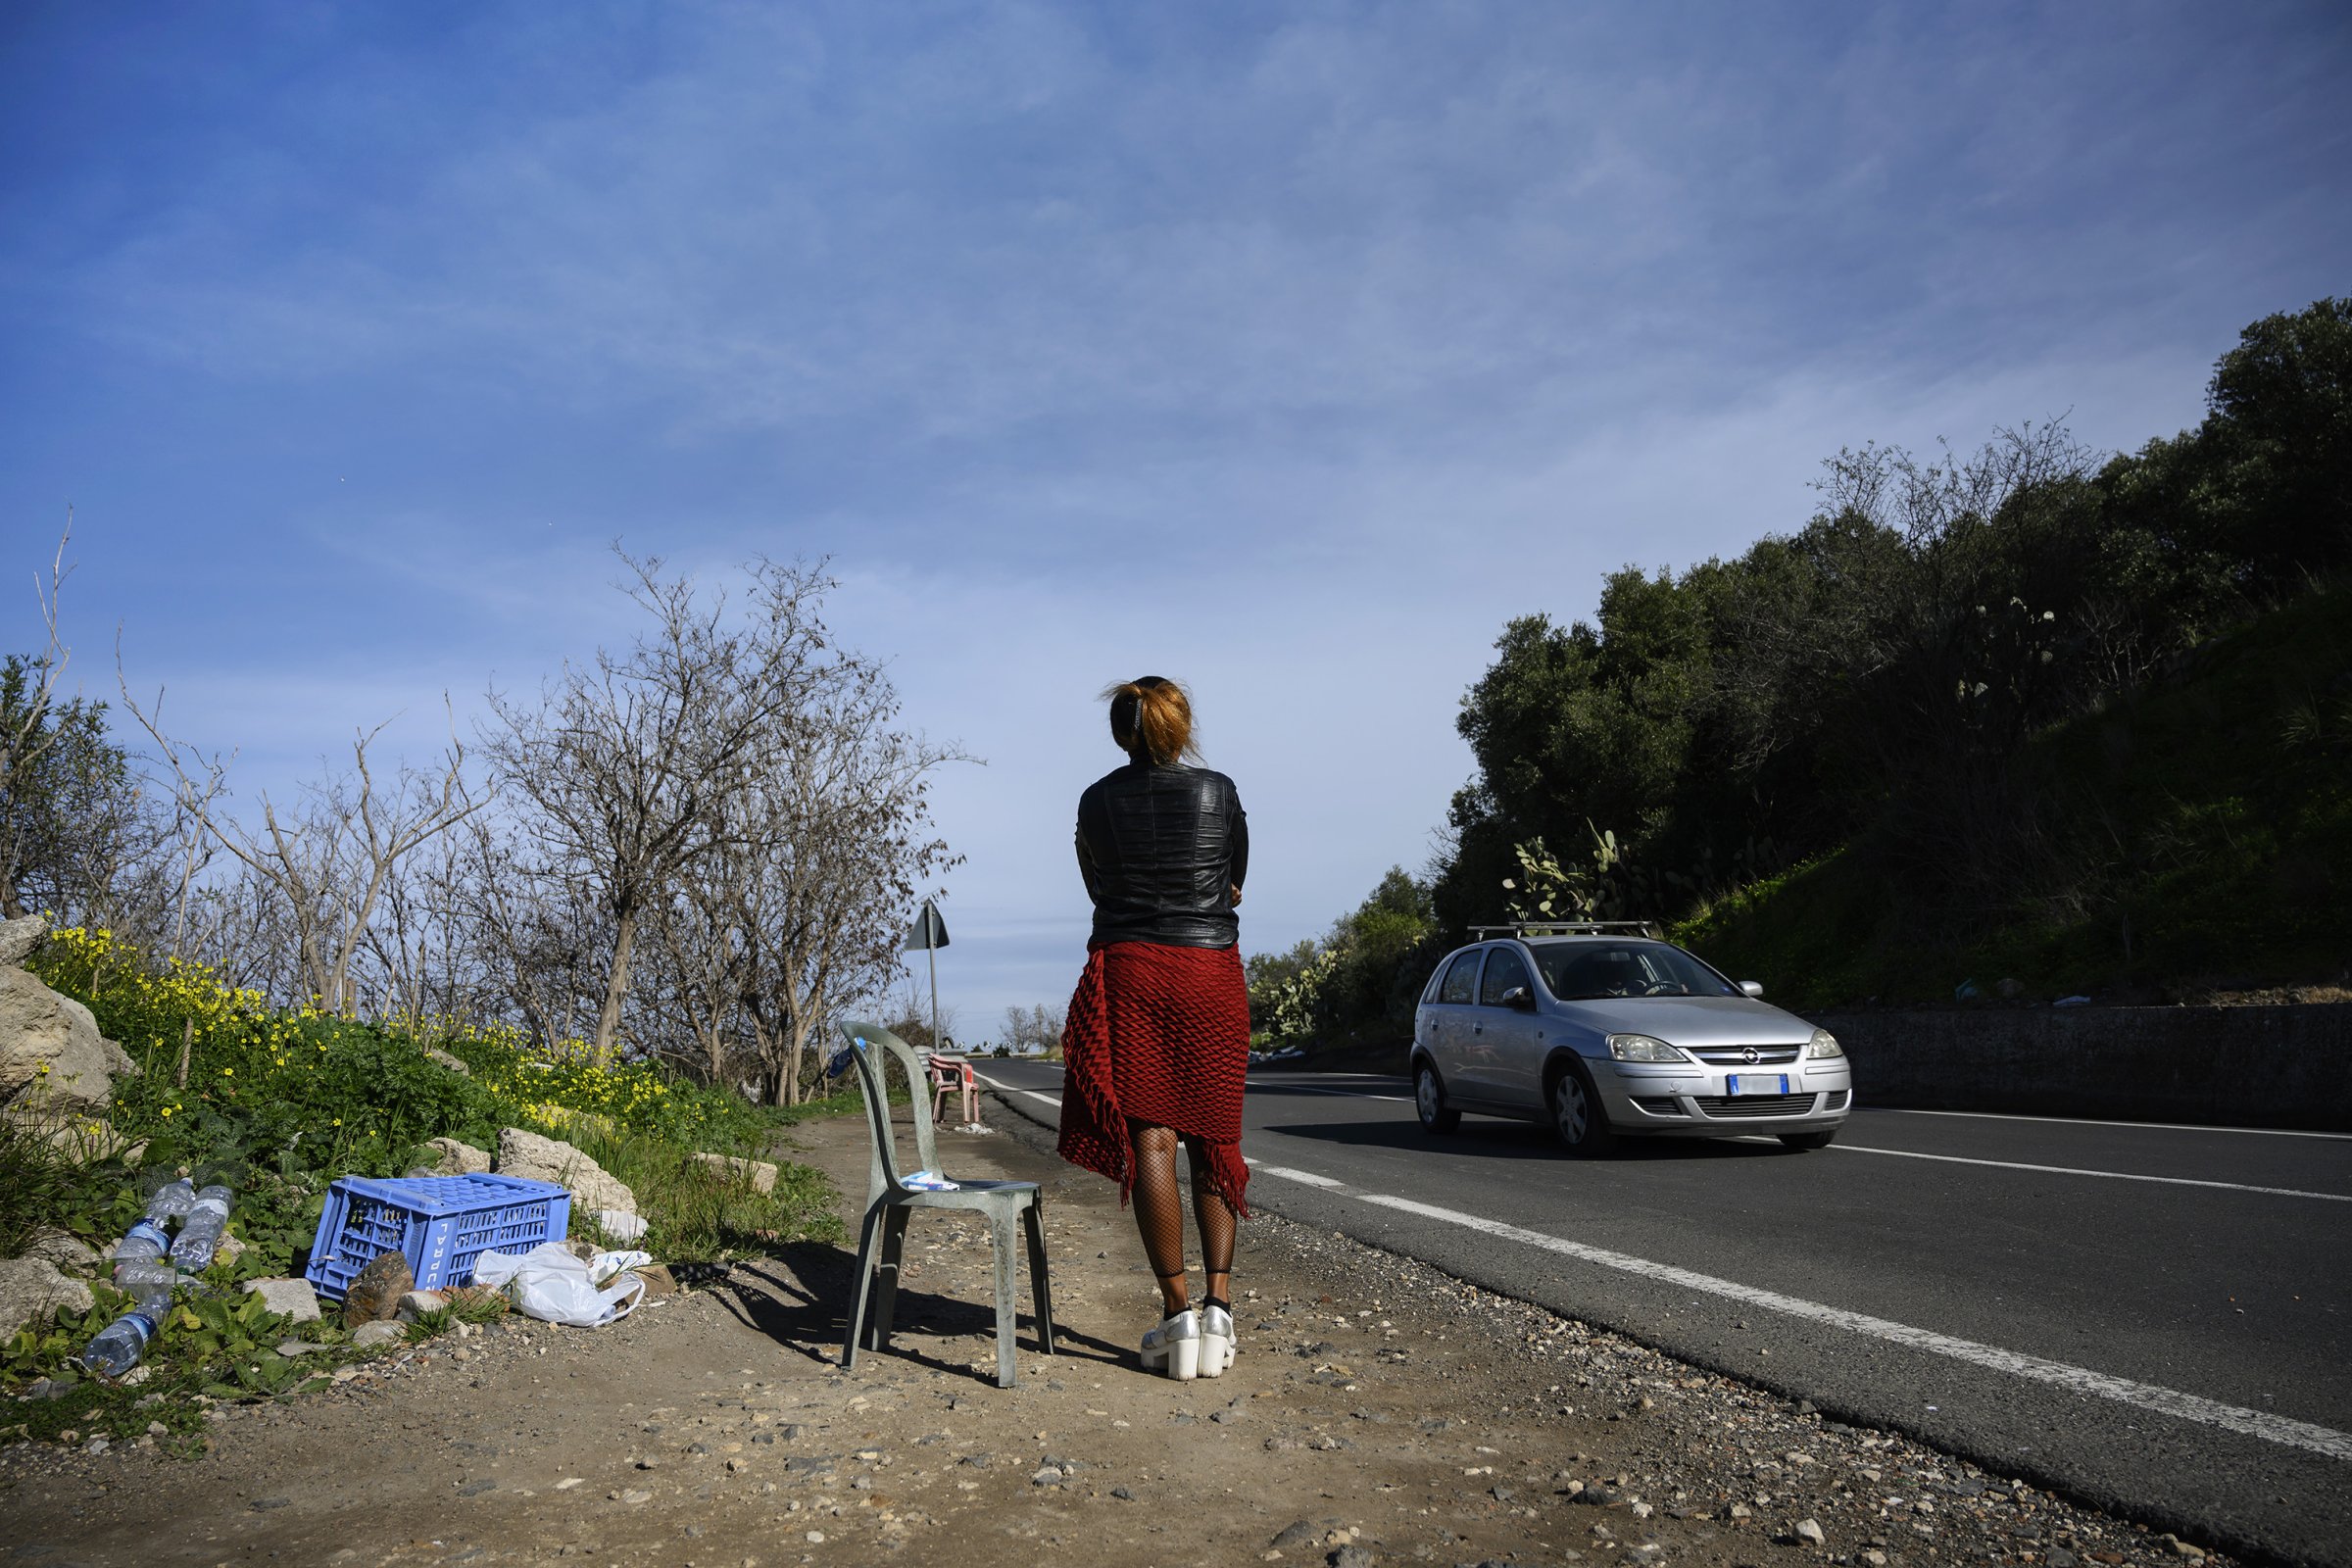 Blessing, 29, a Nigerian woman trafficked into sex work, waits for customers in Sicily, Italy